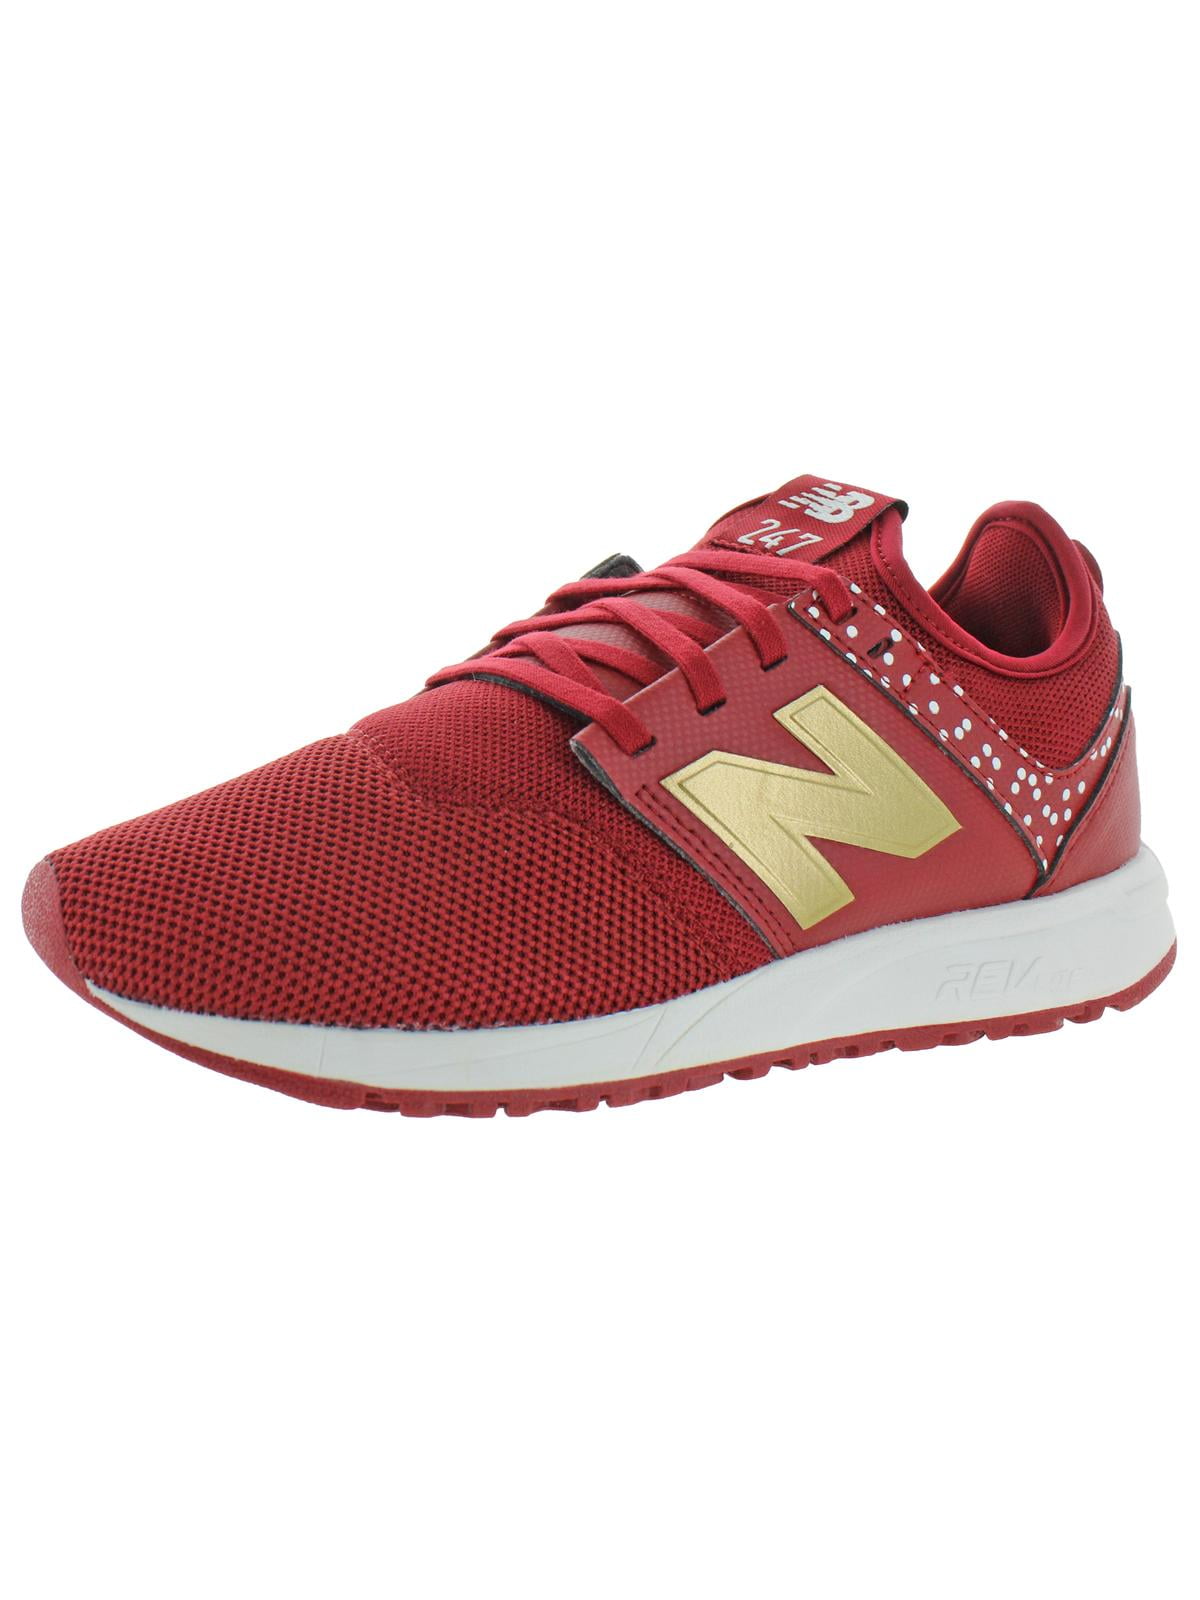 womens red new balance sneakers